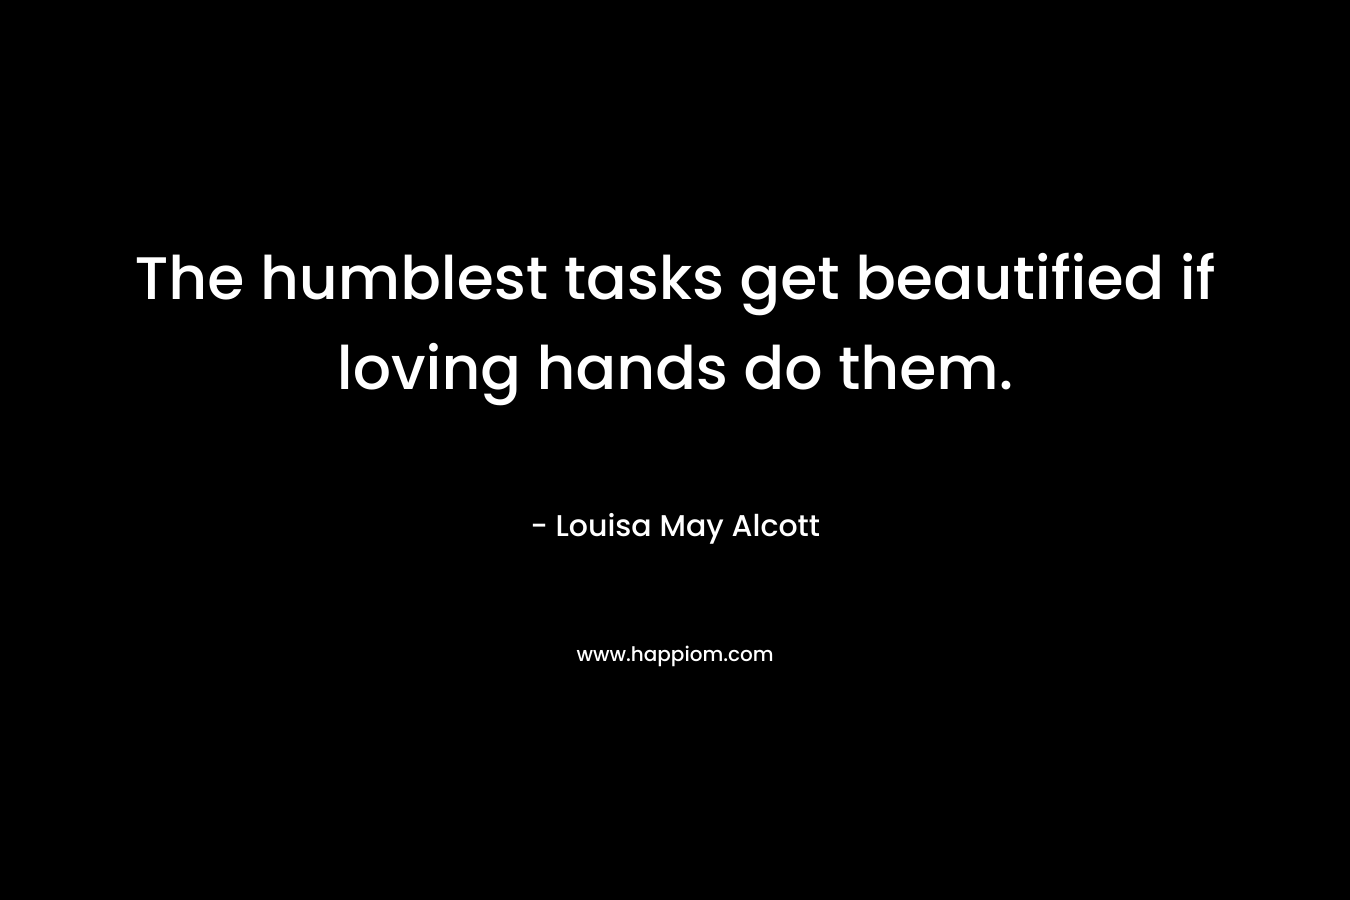 The humblest tasks get beautified if loving hands do them. – Louisa May Alcott